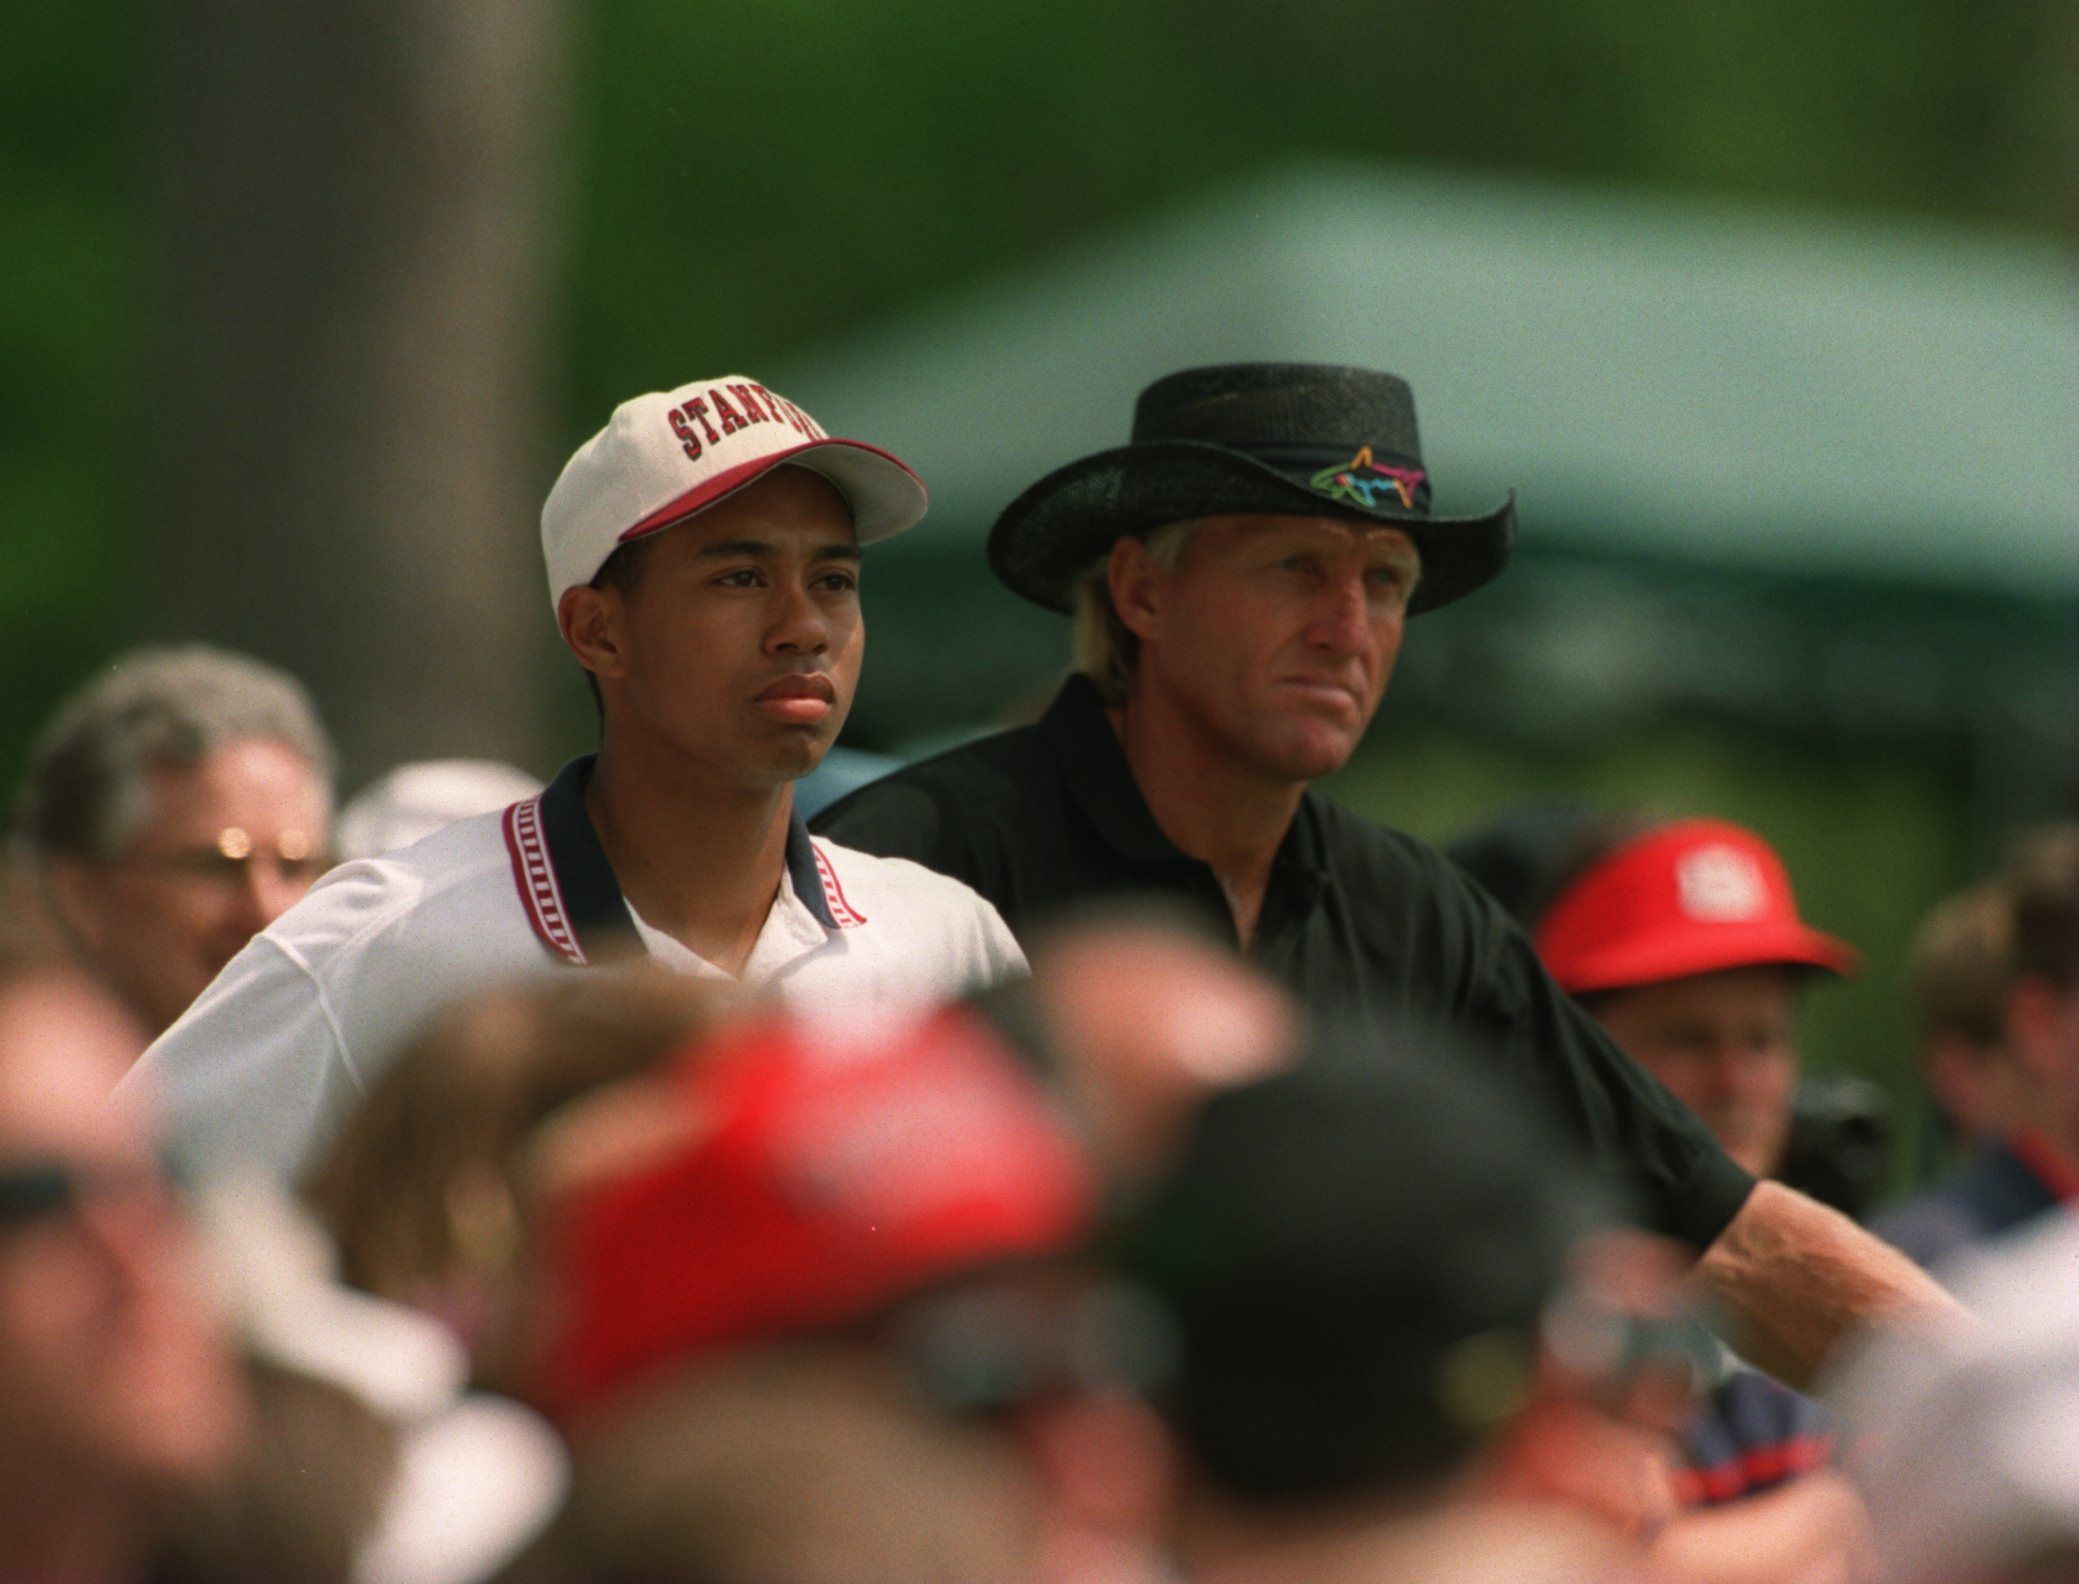 Tiger Woods and Greg Norman back when he was still an amateur player, at the 1995 U.S. Masters Golf Championship. | Source: Getty Images